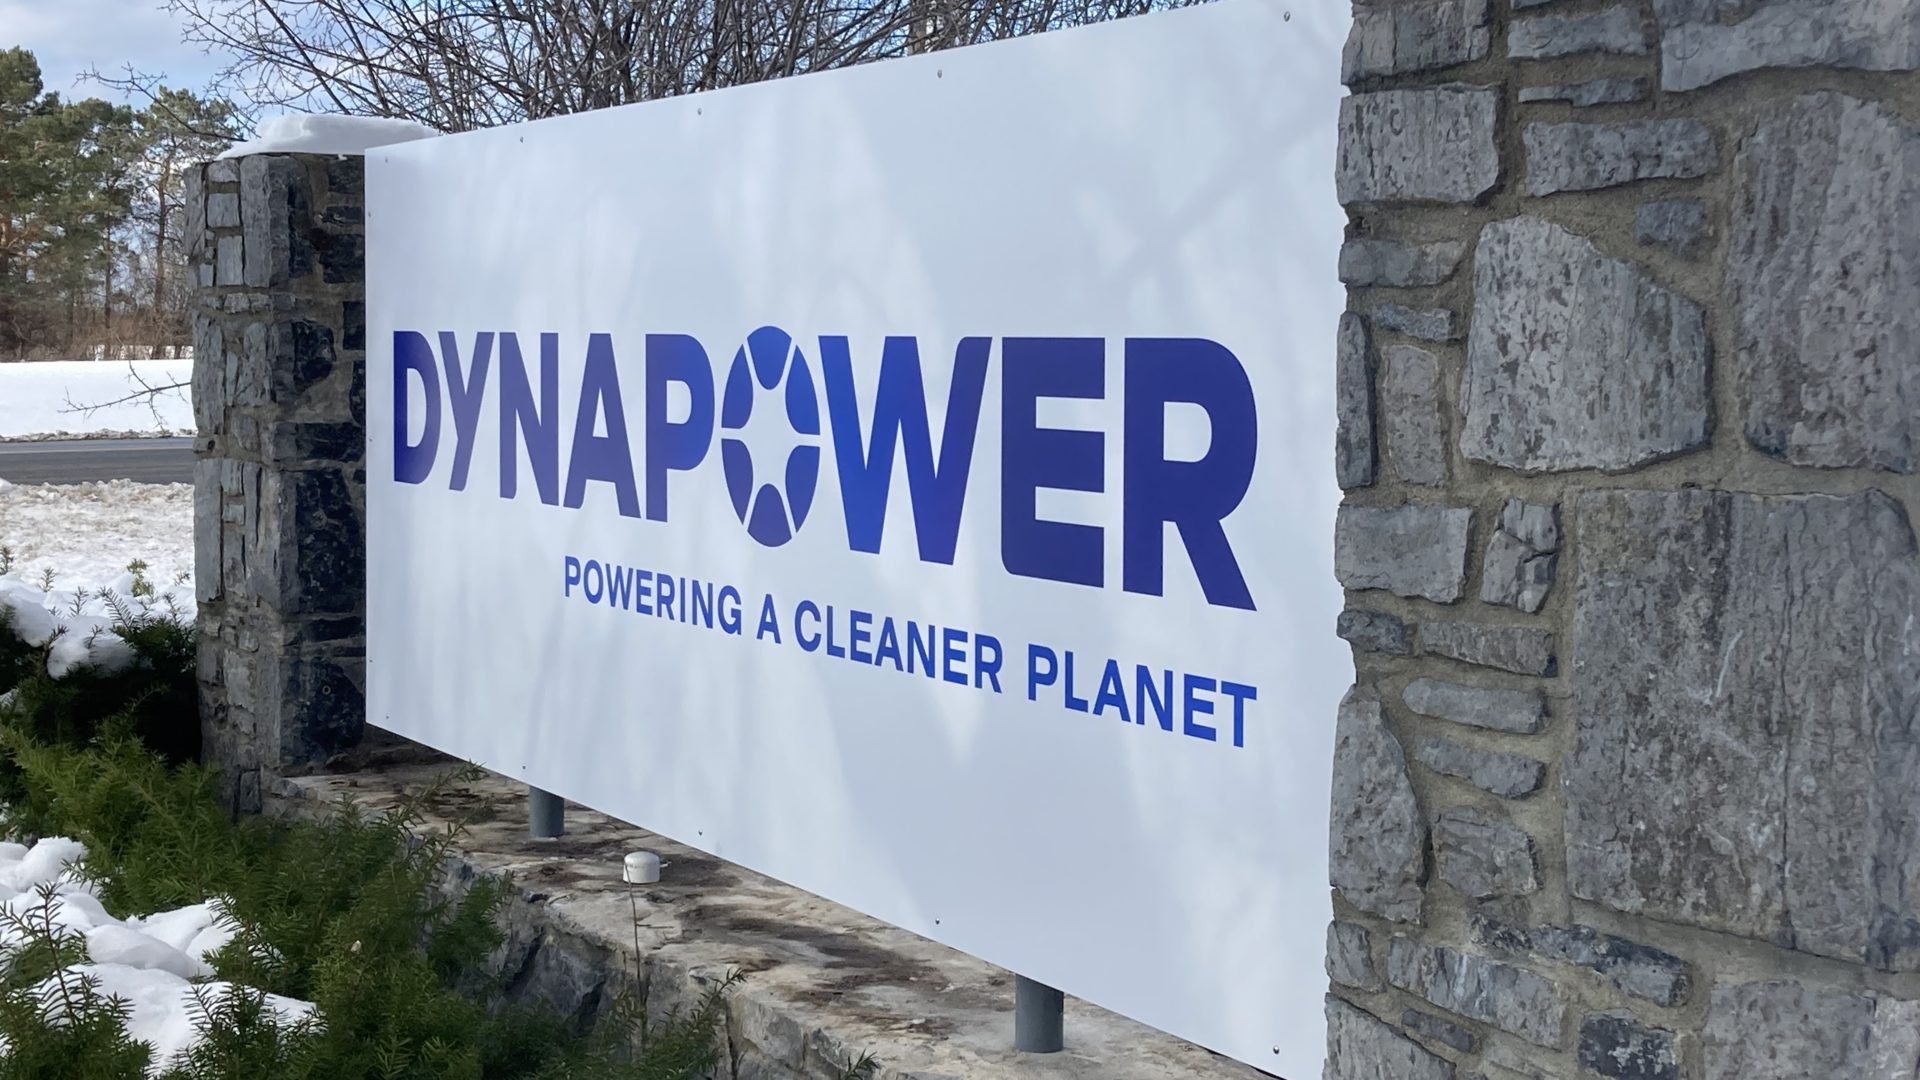 stone wall with white sign that reads "Dynapower, Powering A Cleaner Planet" in blue